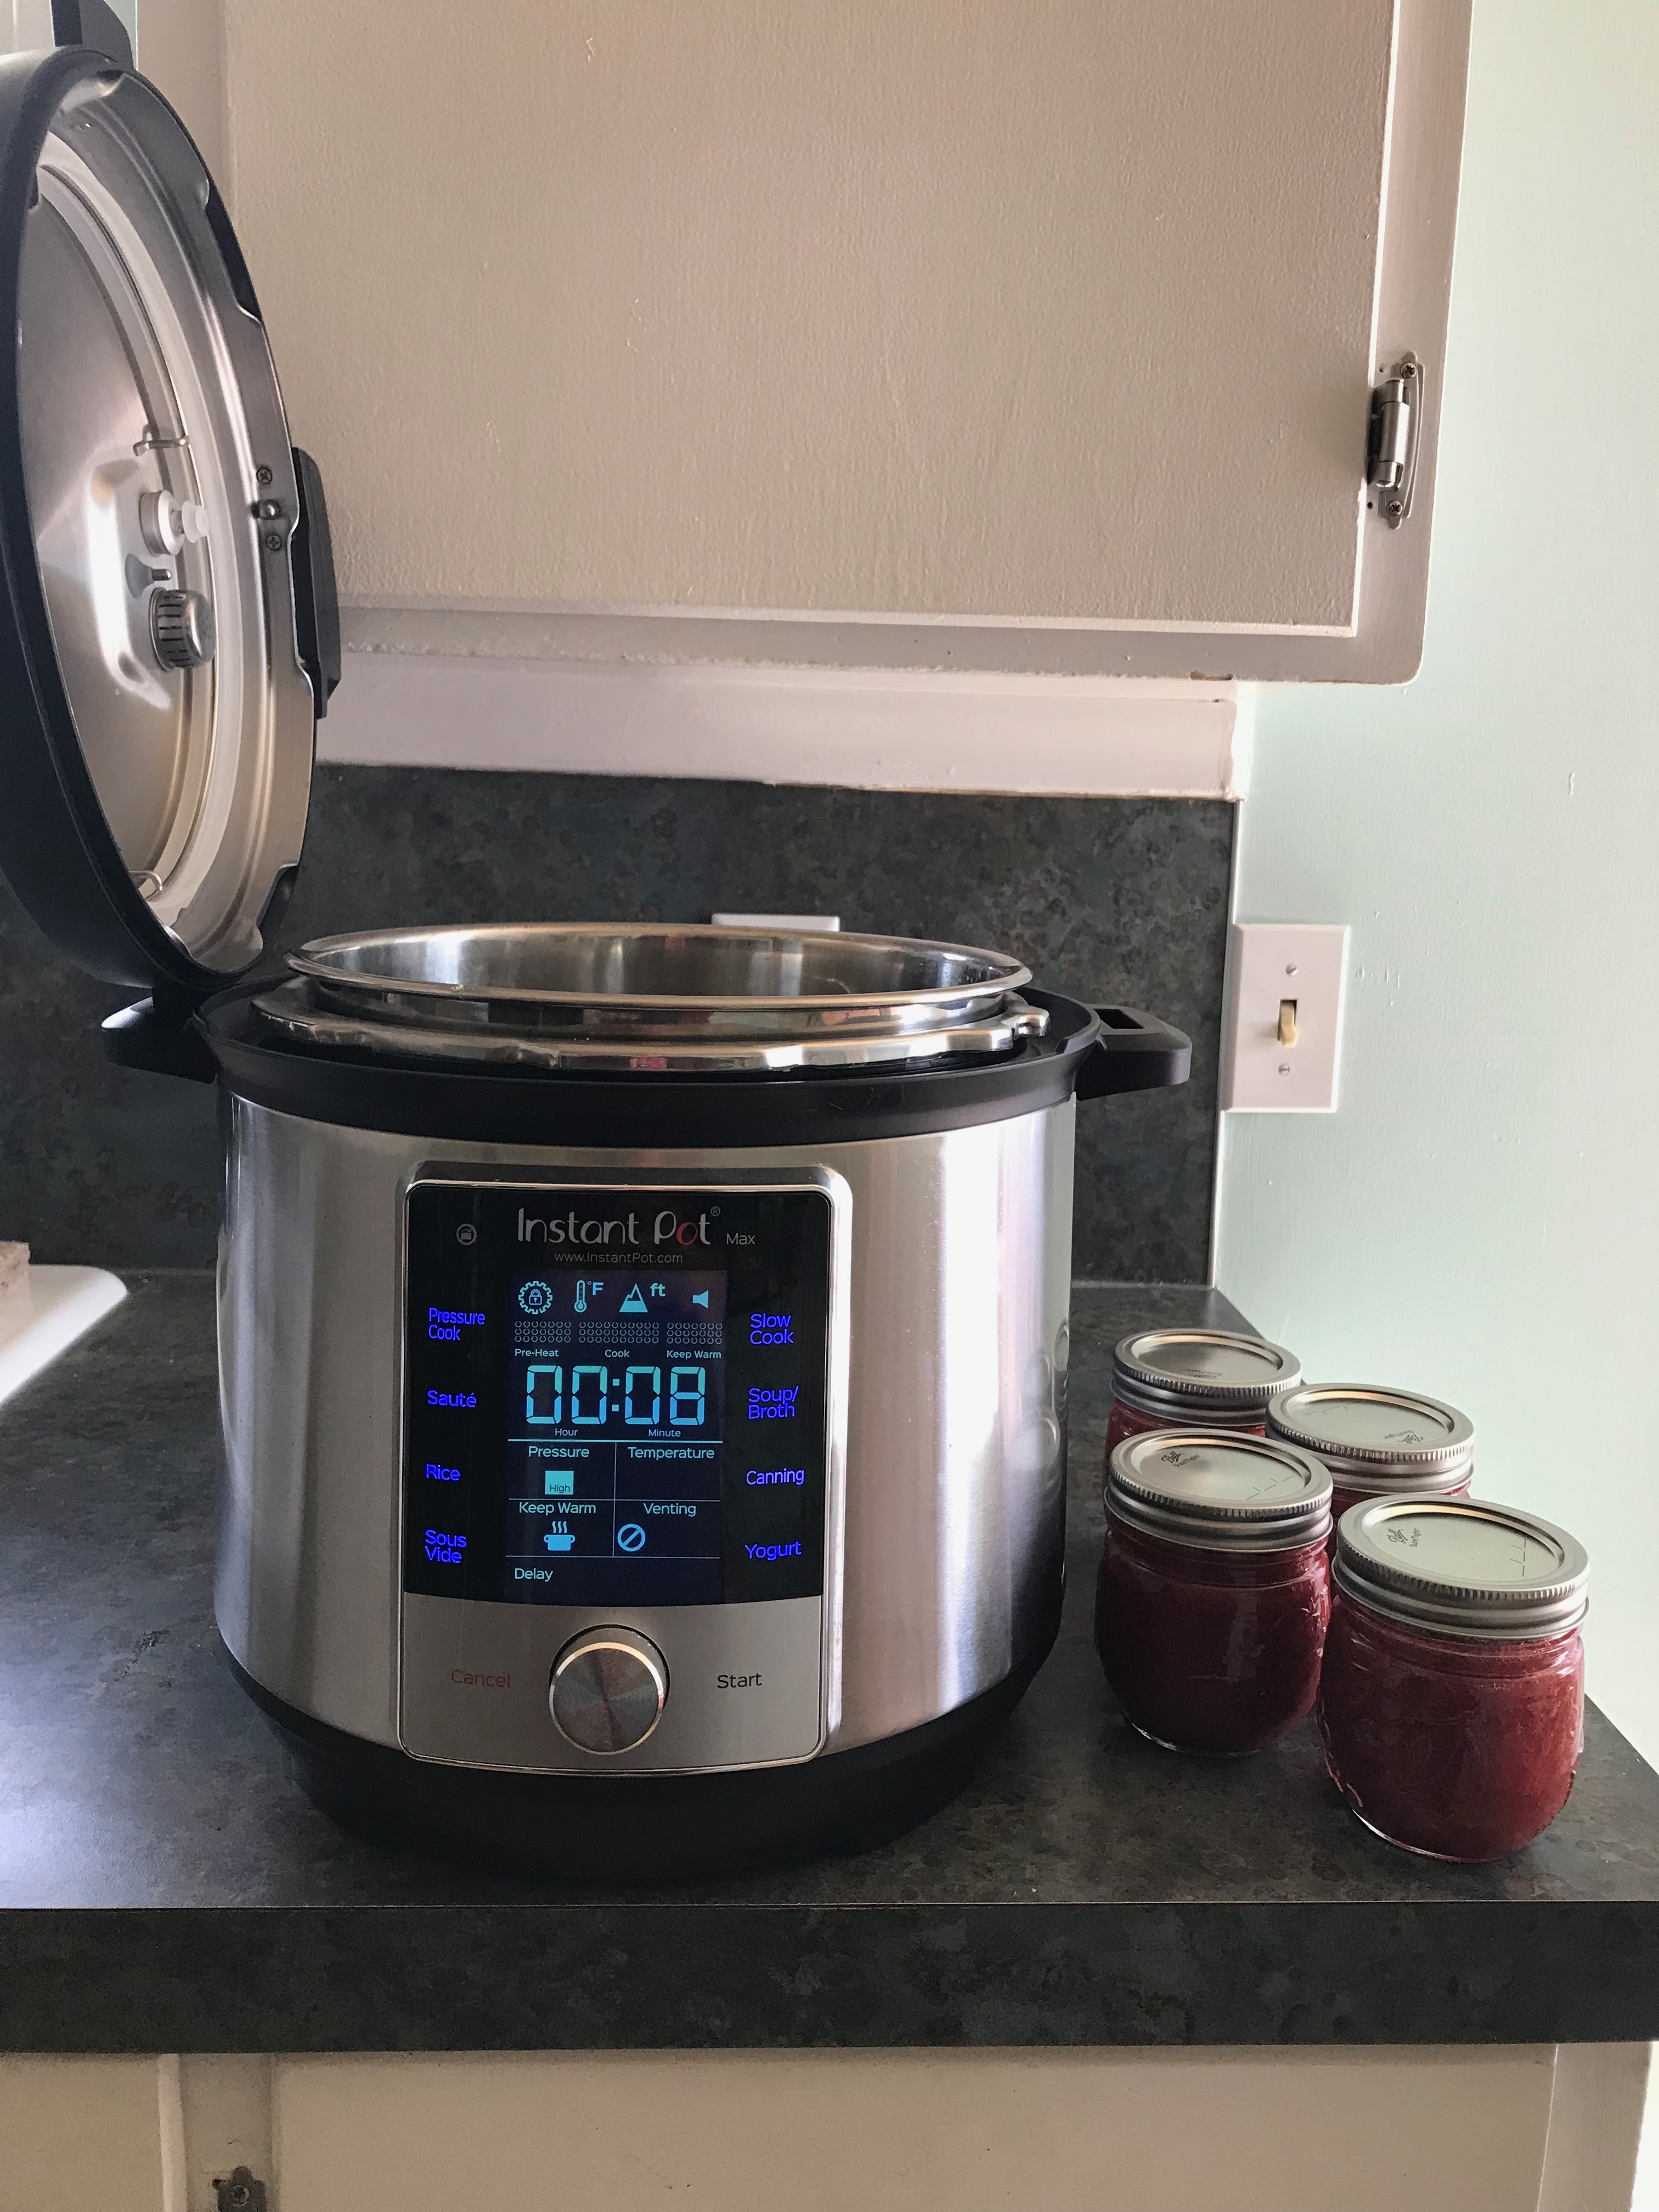 The new Instant Pot Max has a home canning feature. Is it safe